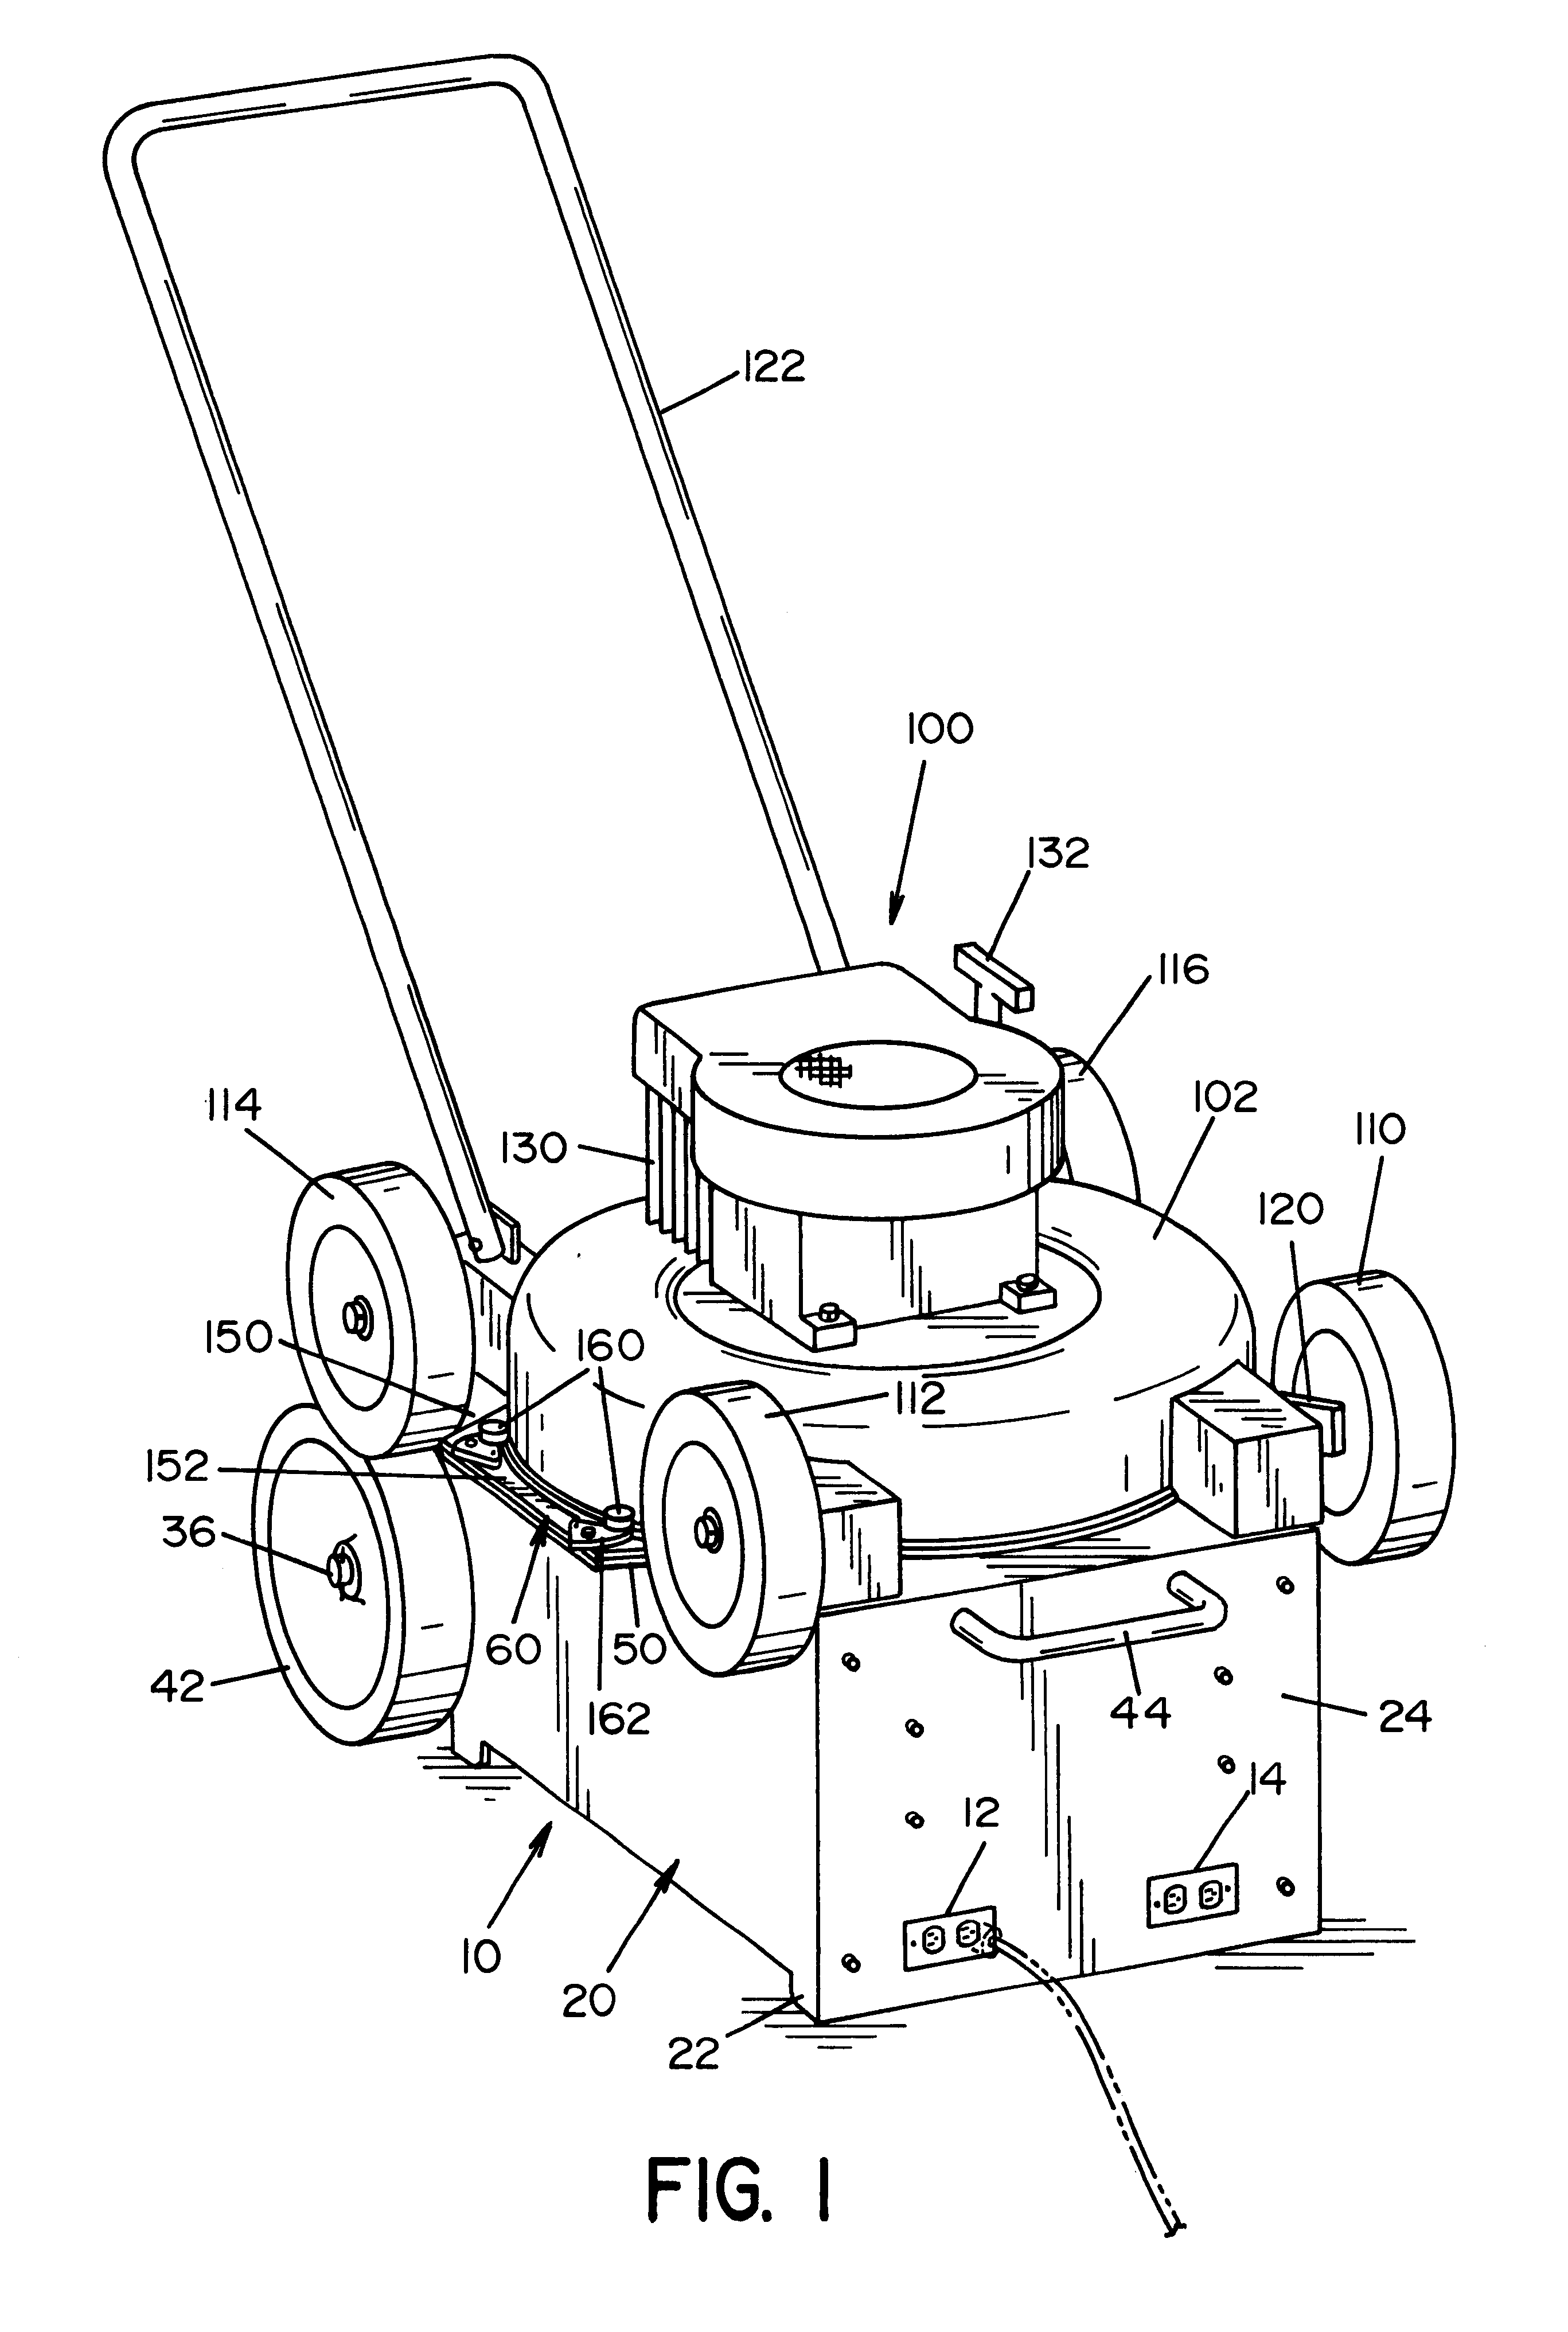 Electric generating domestic implement